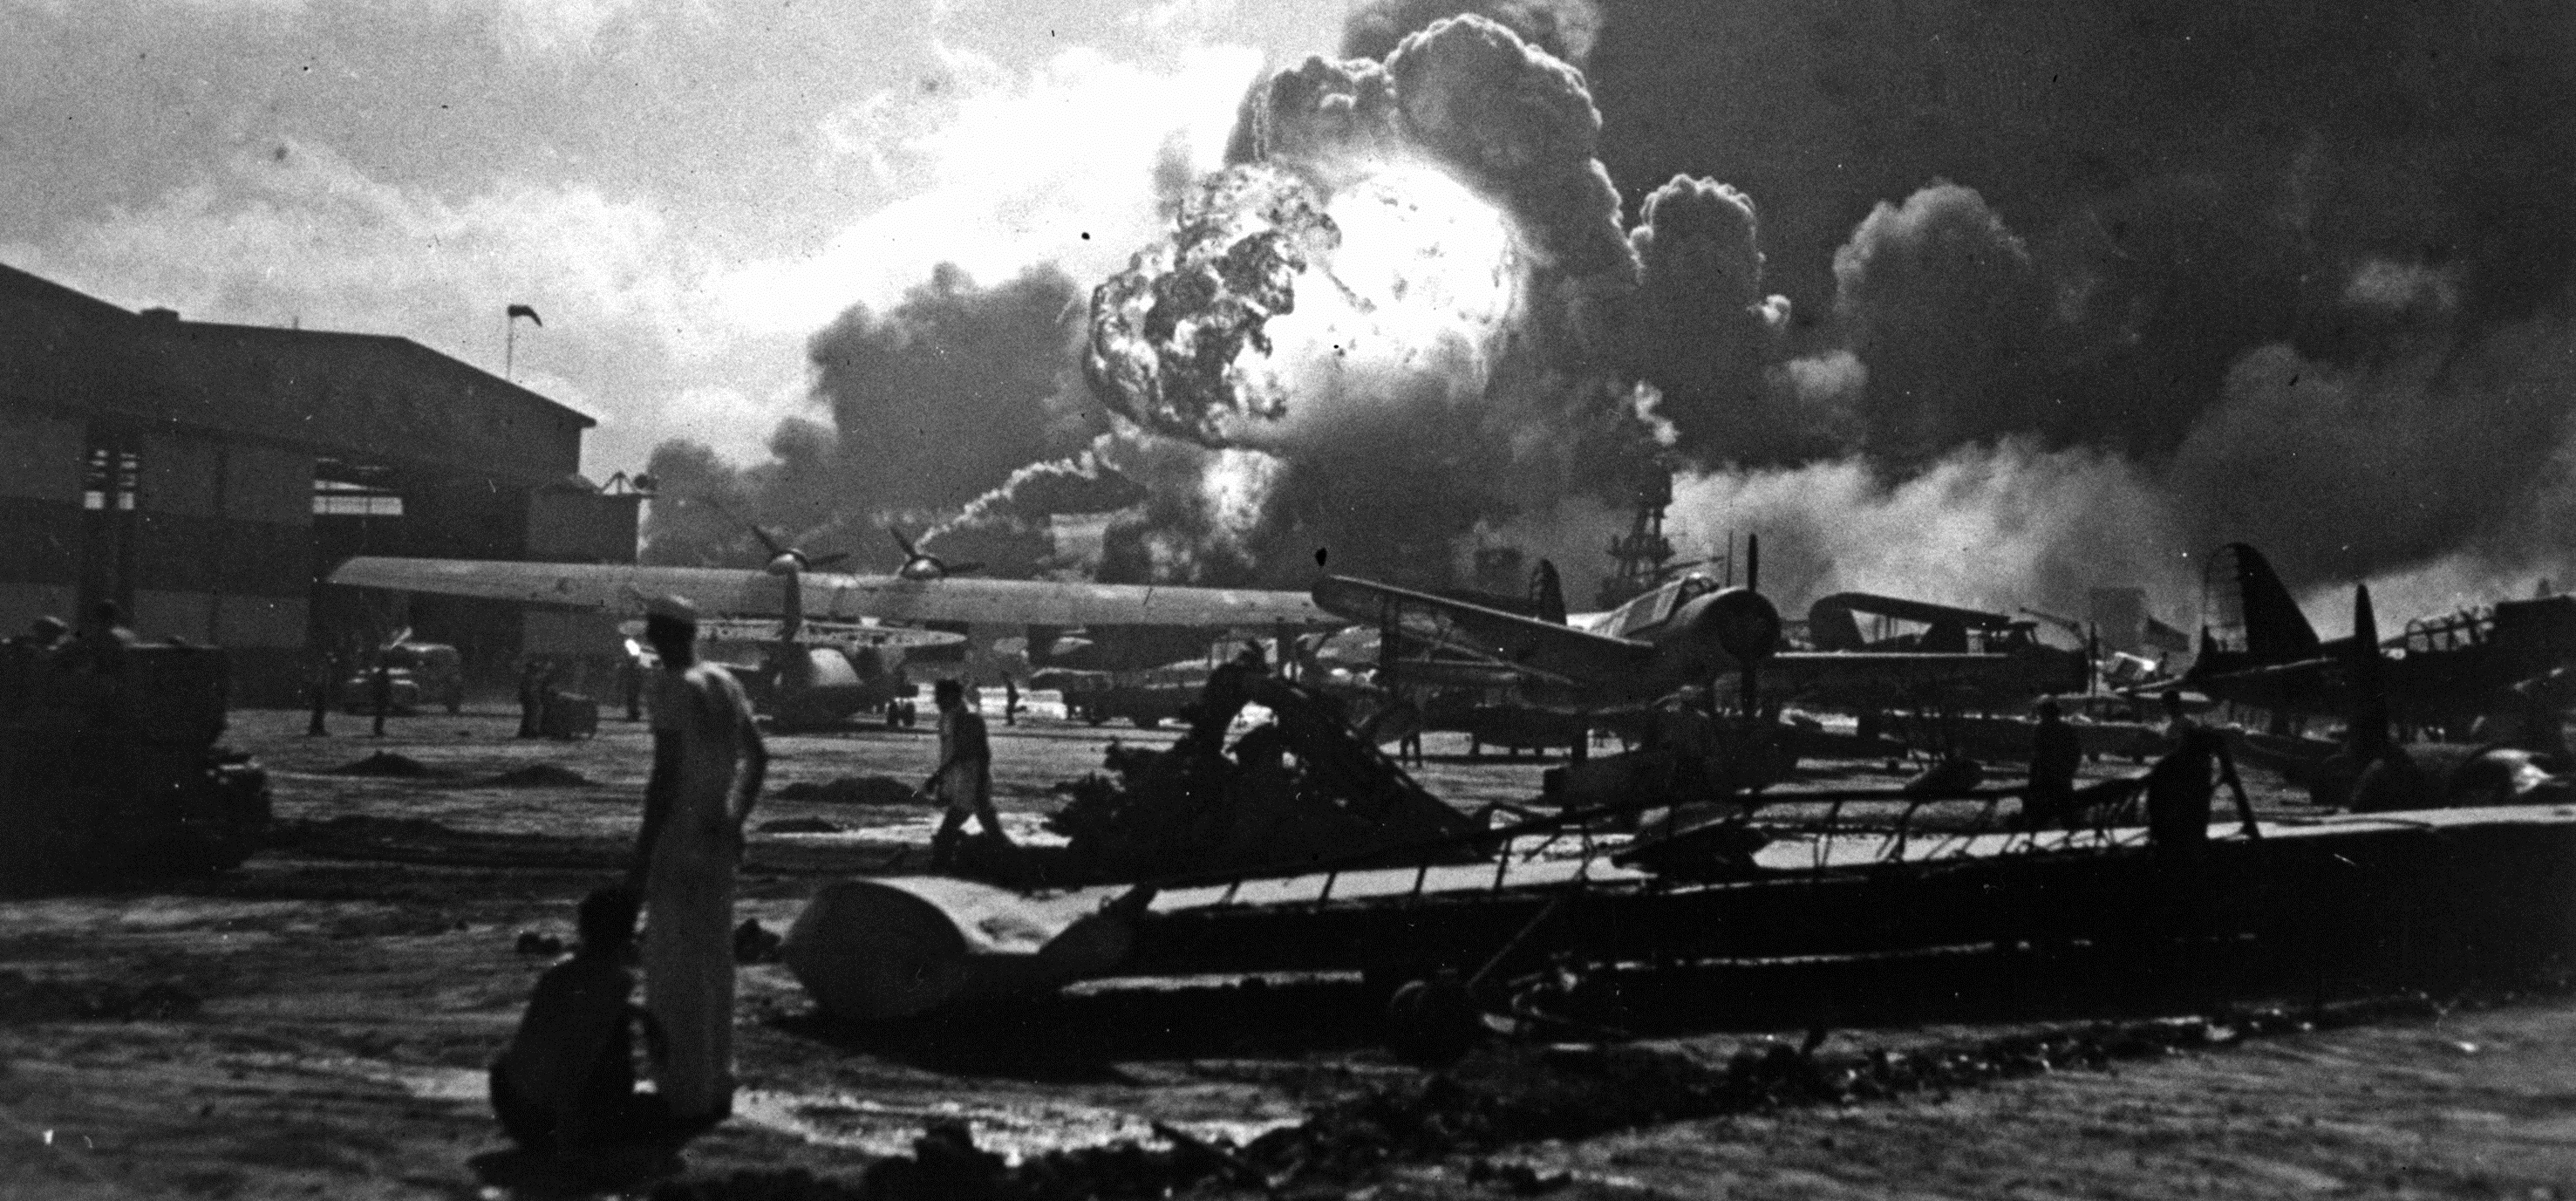 Pearl Harbor: The Real Story